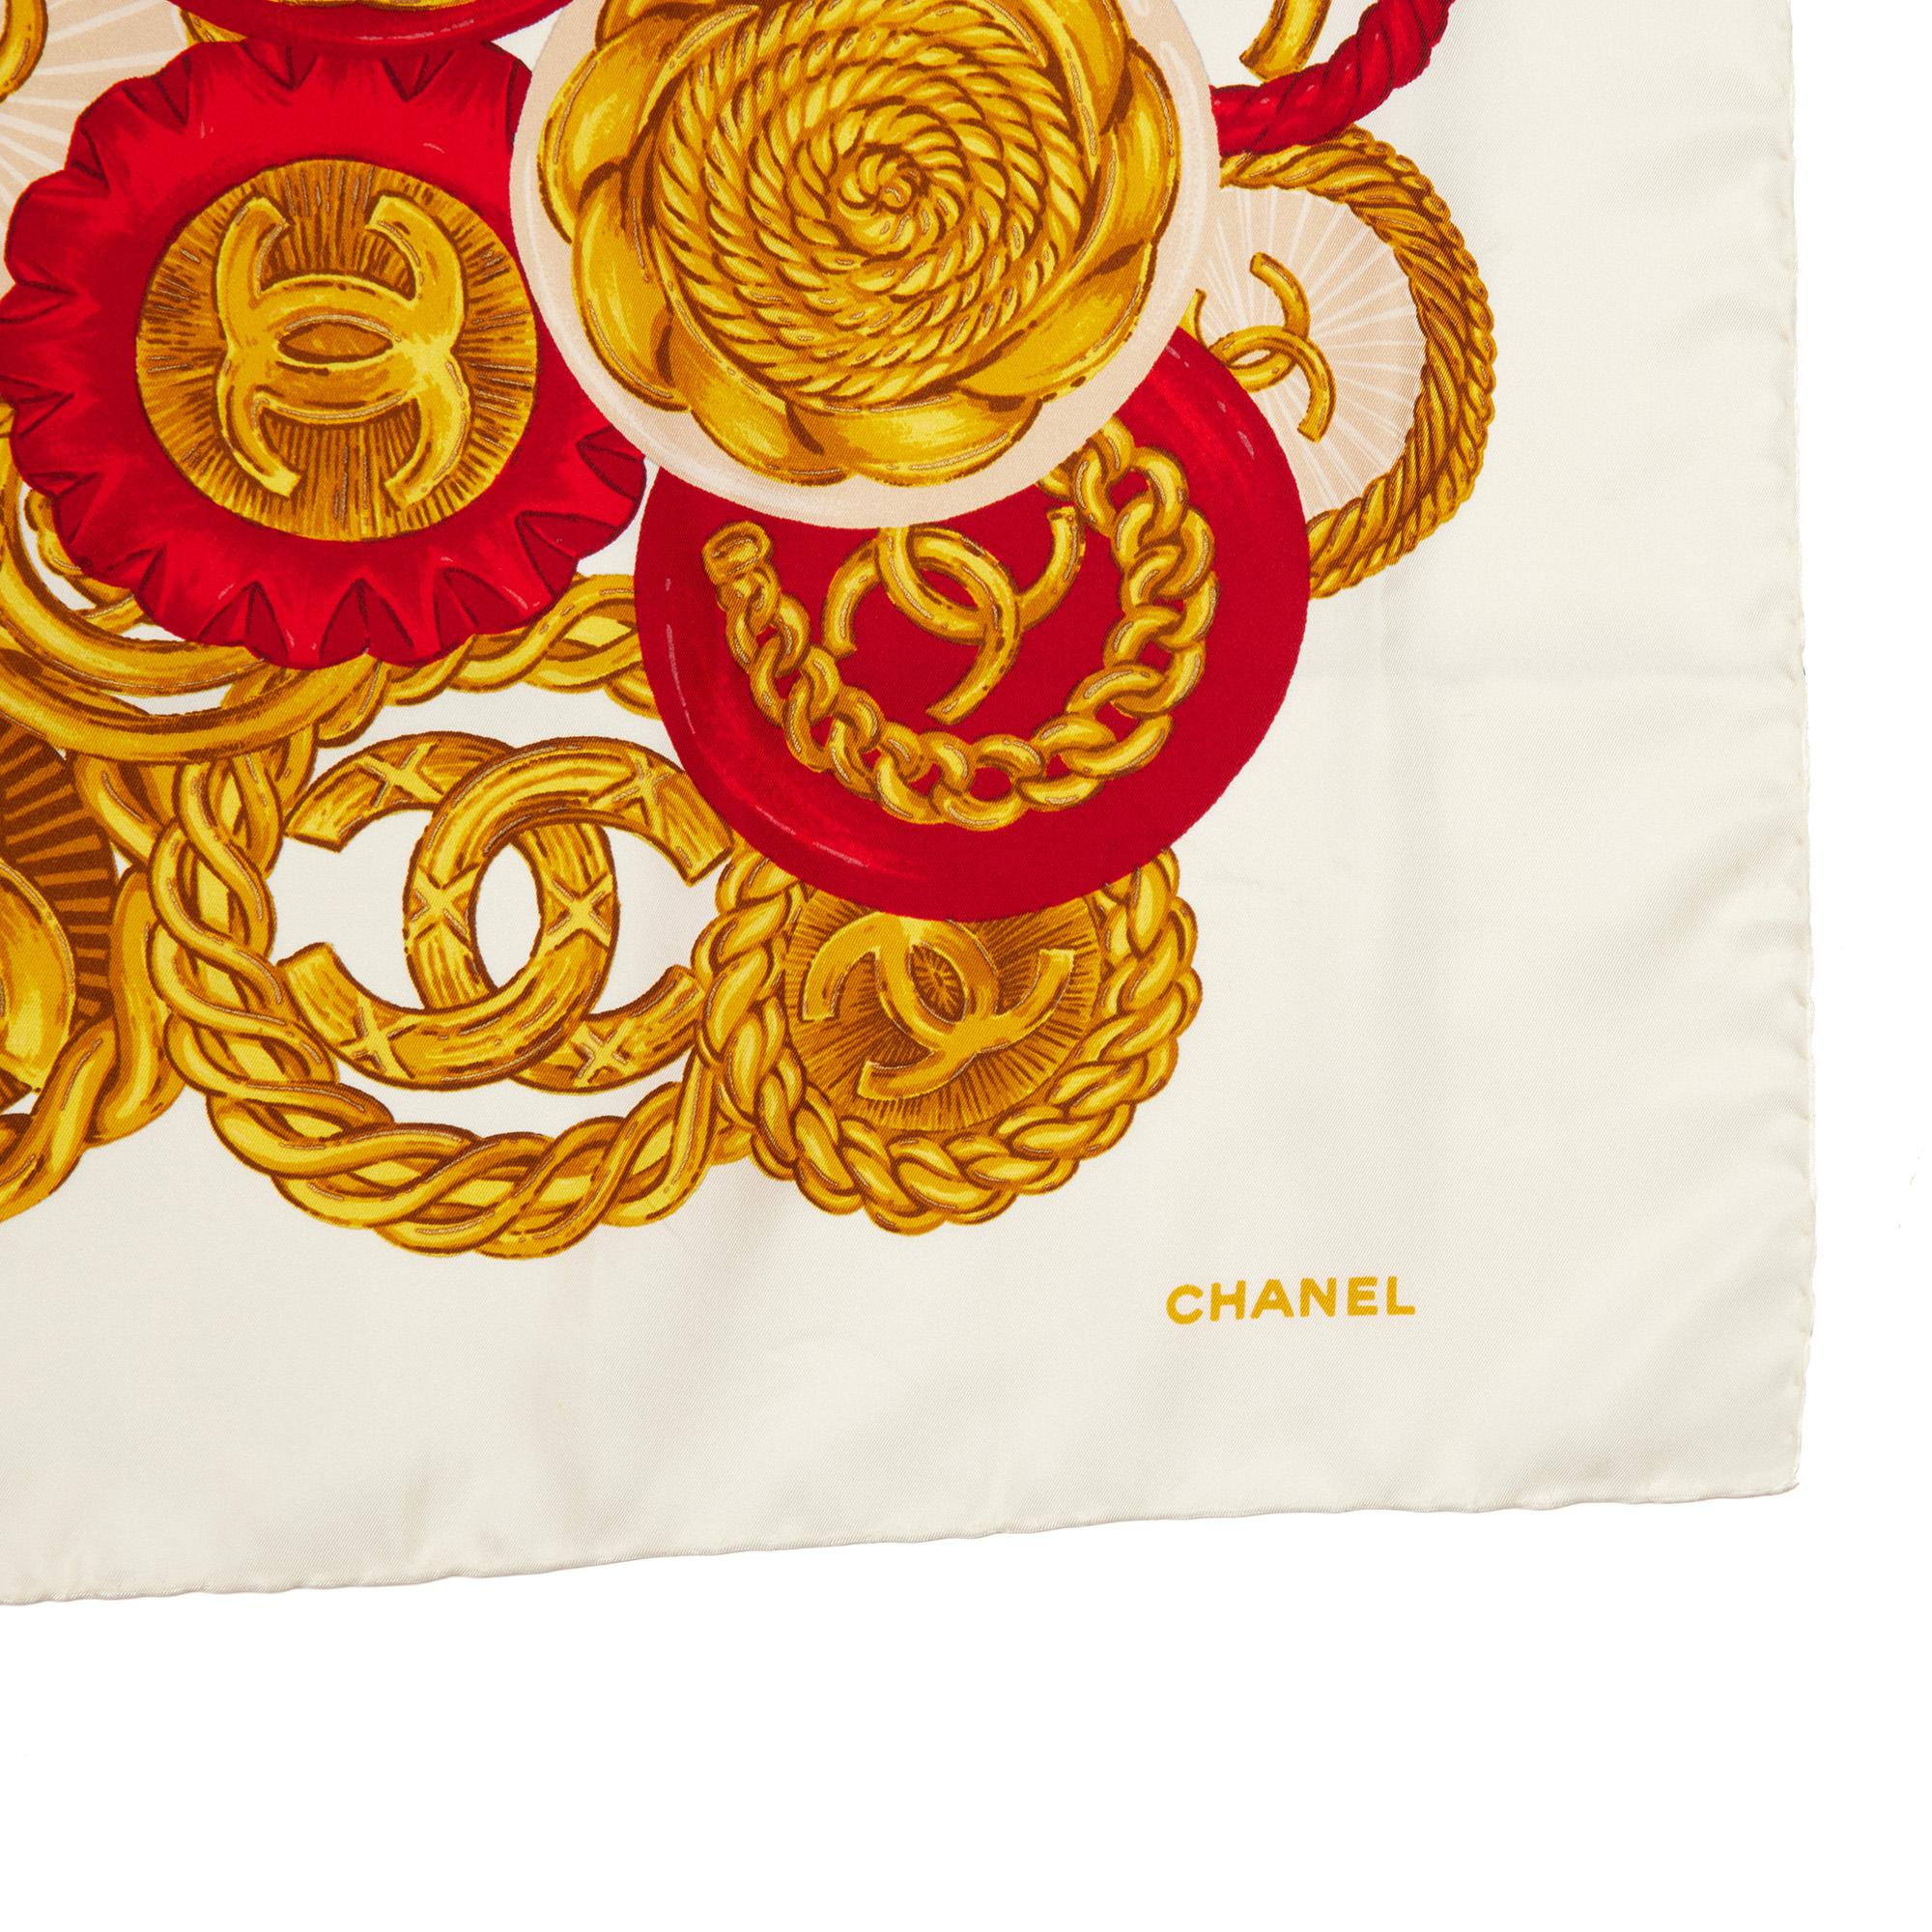 CHANEL WHITE, GOLD & RED SILK VINTAGE MEDALLION COIN CHAIN PRINT SCARF

CONDITION NOTES
The exterior is in excellent condition with minimal signs of use.
Overall this item is in excellent pre-owned condition. Please note the majority of the items we